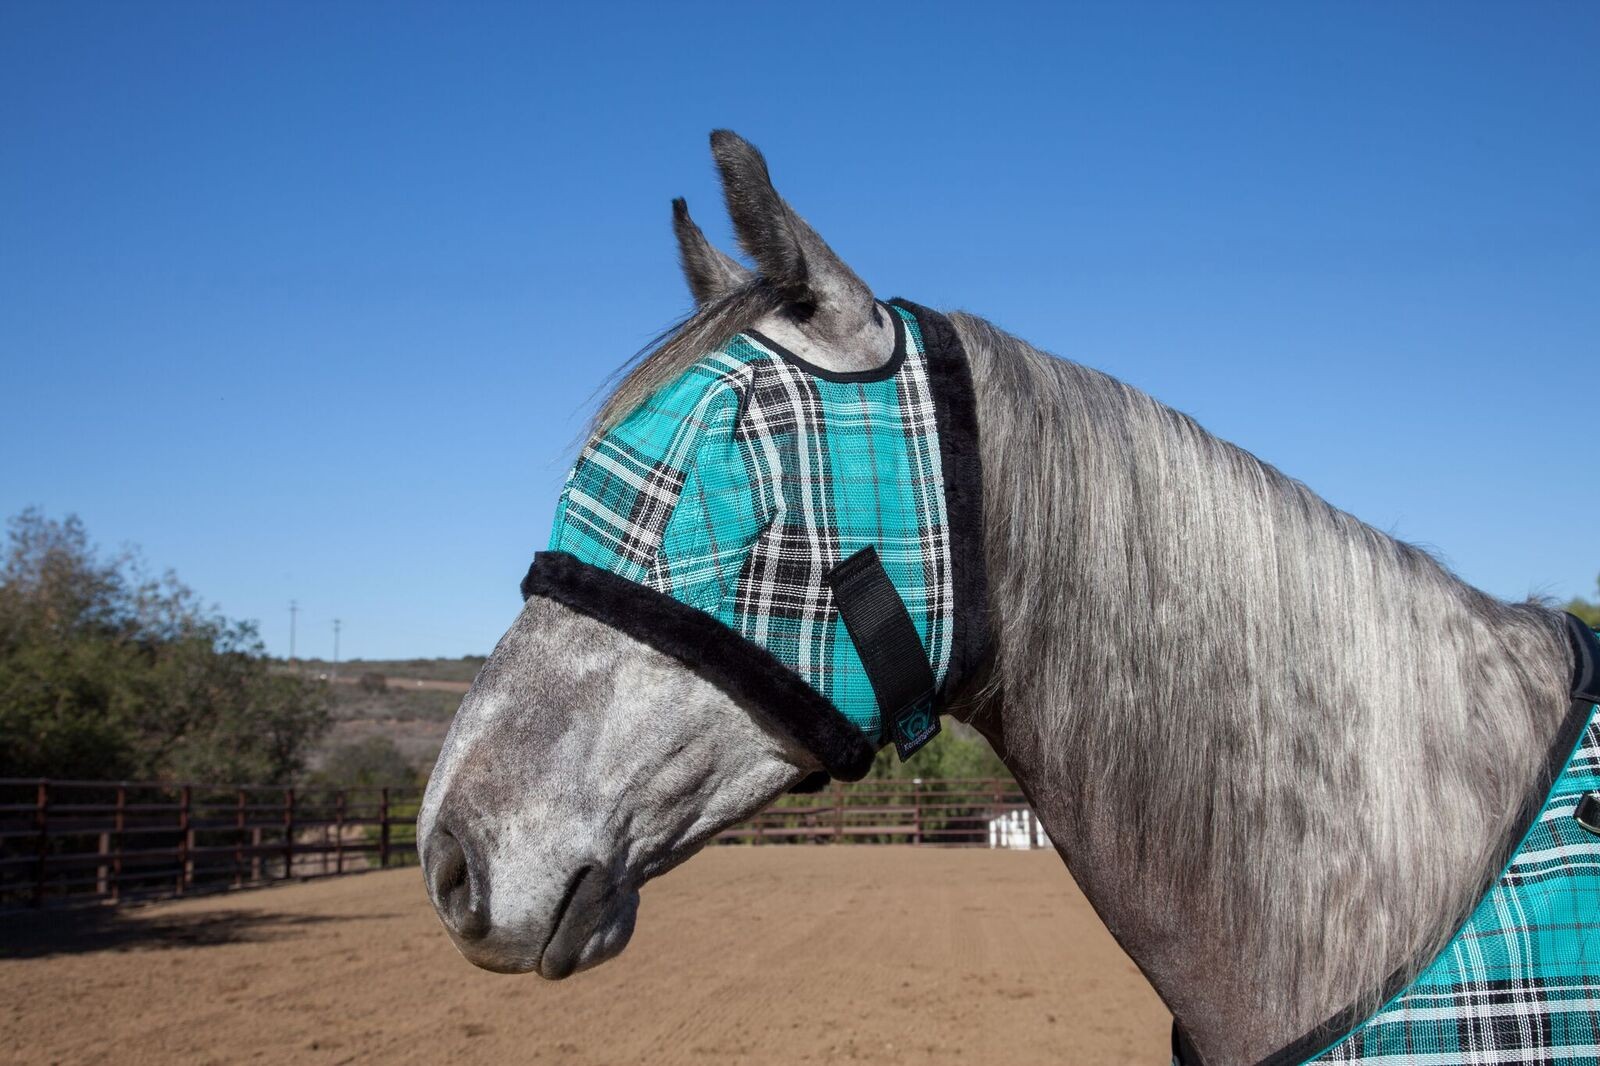 Kensington Fly Mask Fleece Trim for Horses Protects Face Breathable Non Heat Transferring M, Grey Perfect Year Round, Eyes from Flies UV Rays While Allowing Full Visibility 